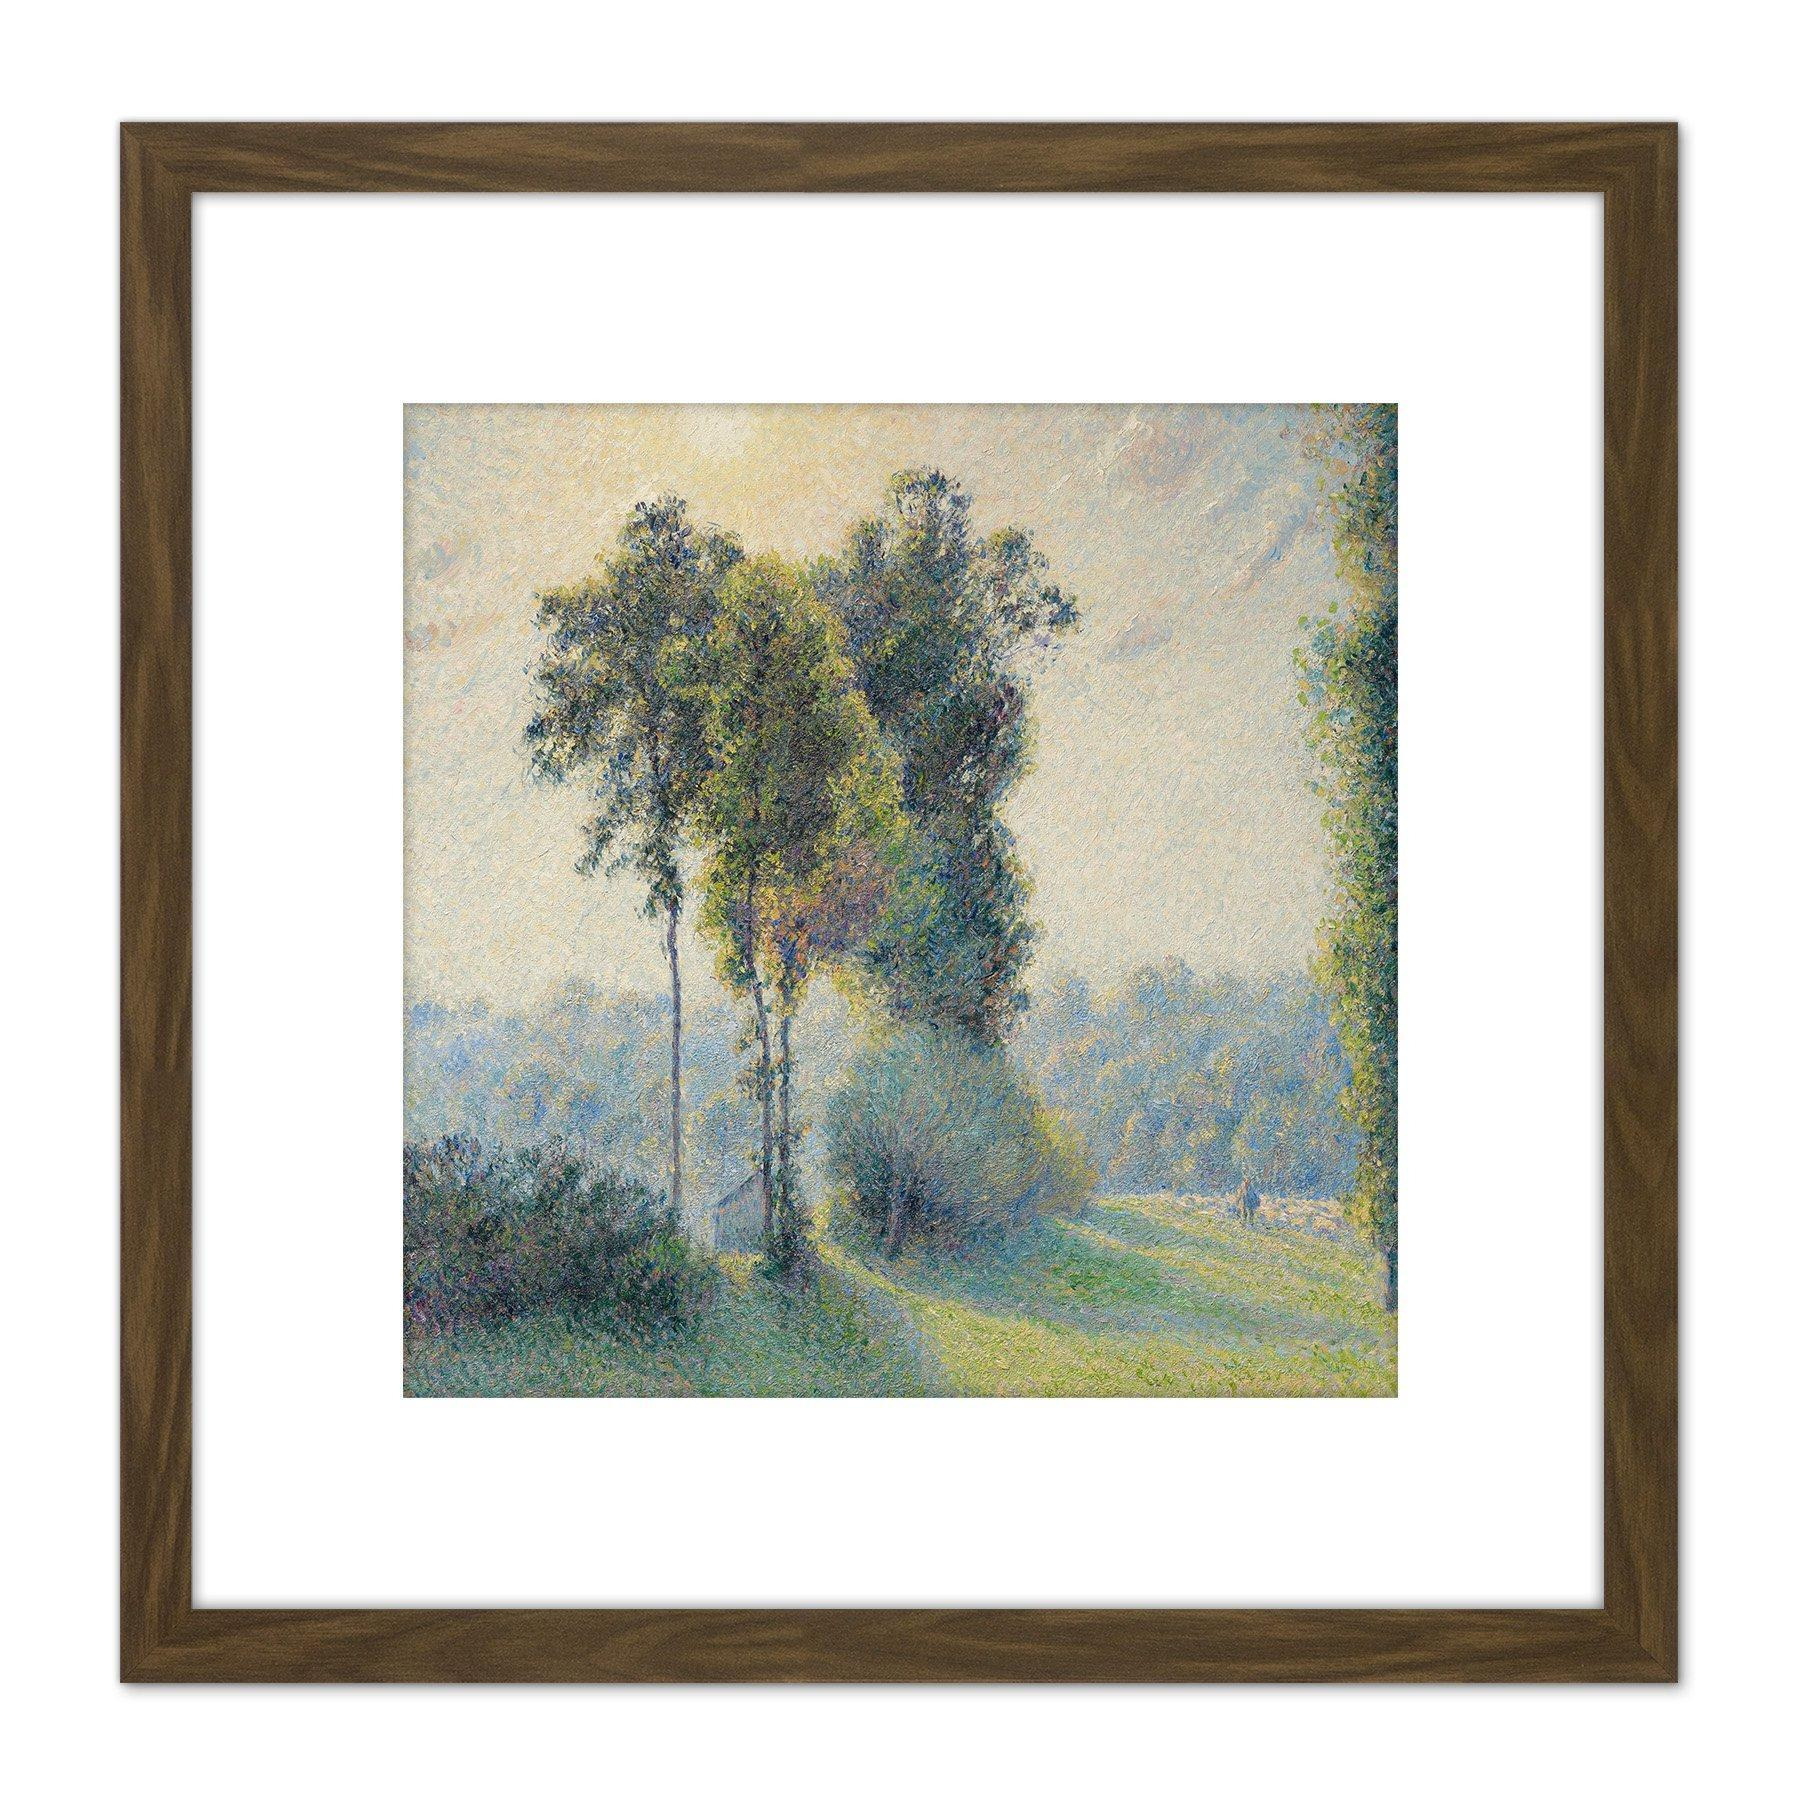 Pissarro Landscape Saint Charles Gisors Sunset Painting 8X8 Inch Square Wooden Framed Wall Art Print Picture with Mount - image 1